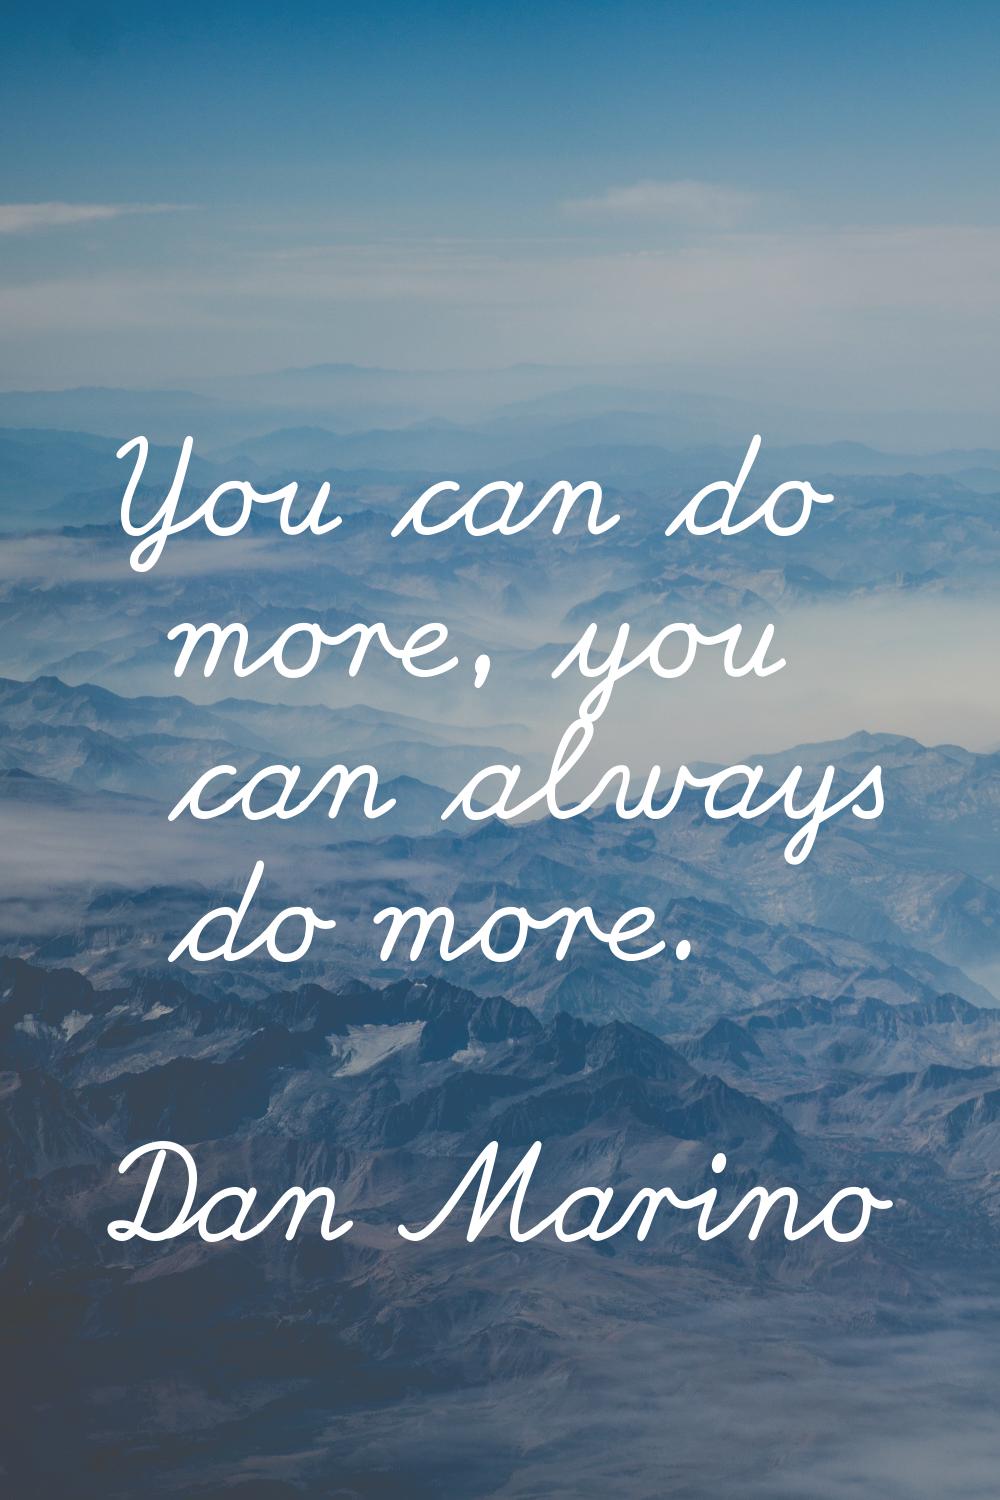 You can do more, you can always do more.